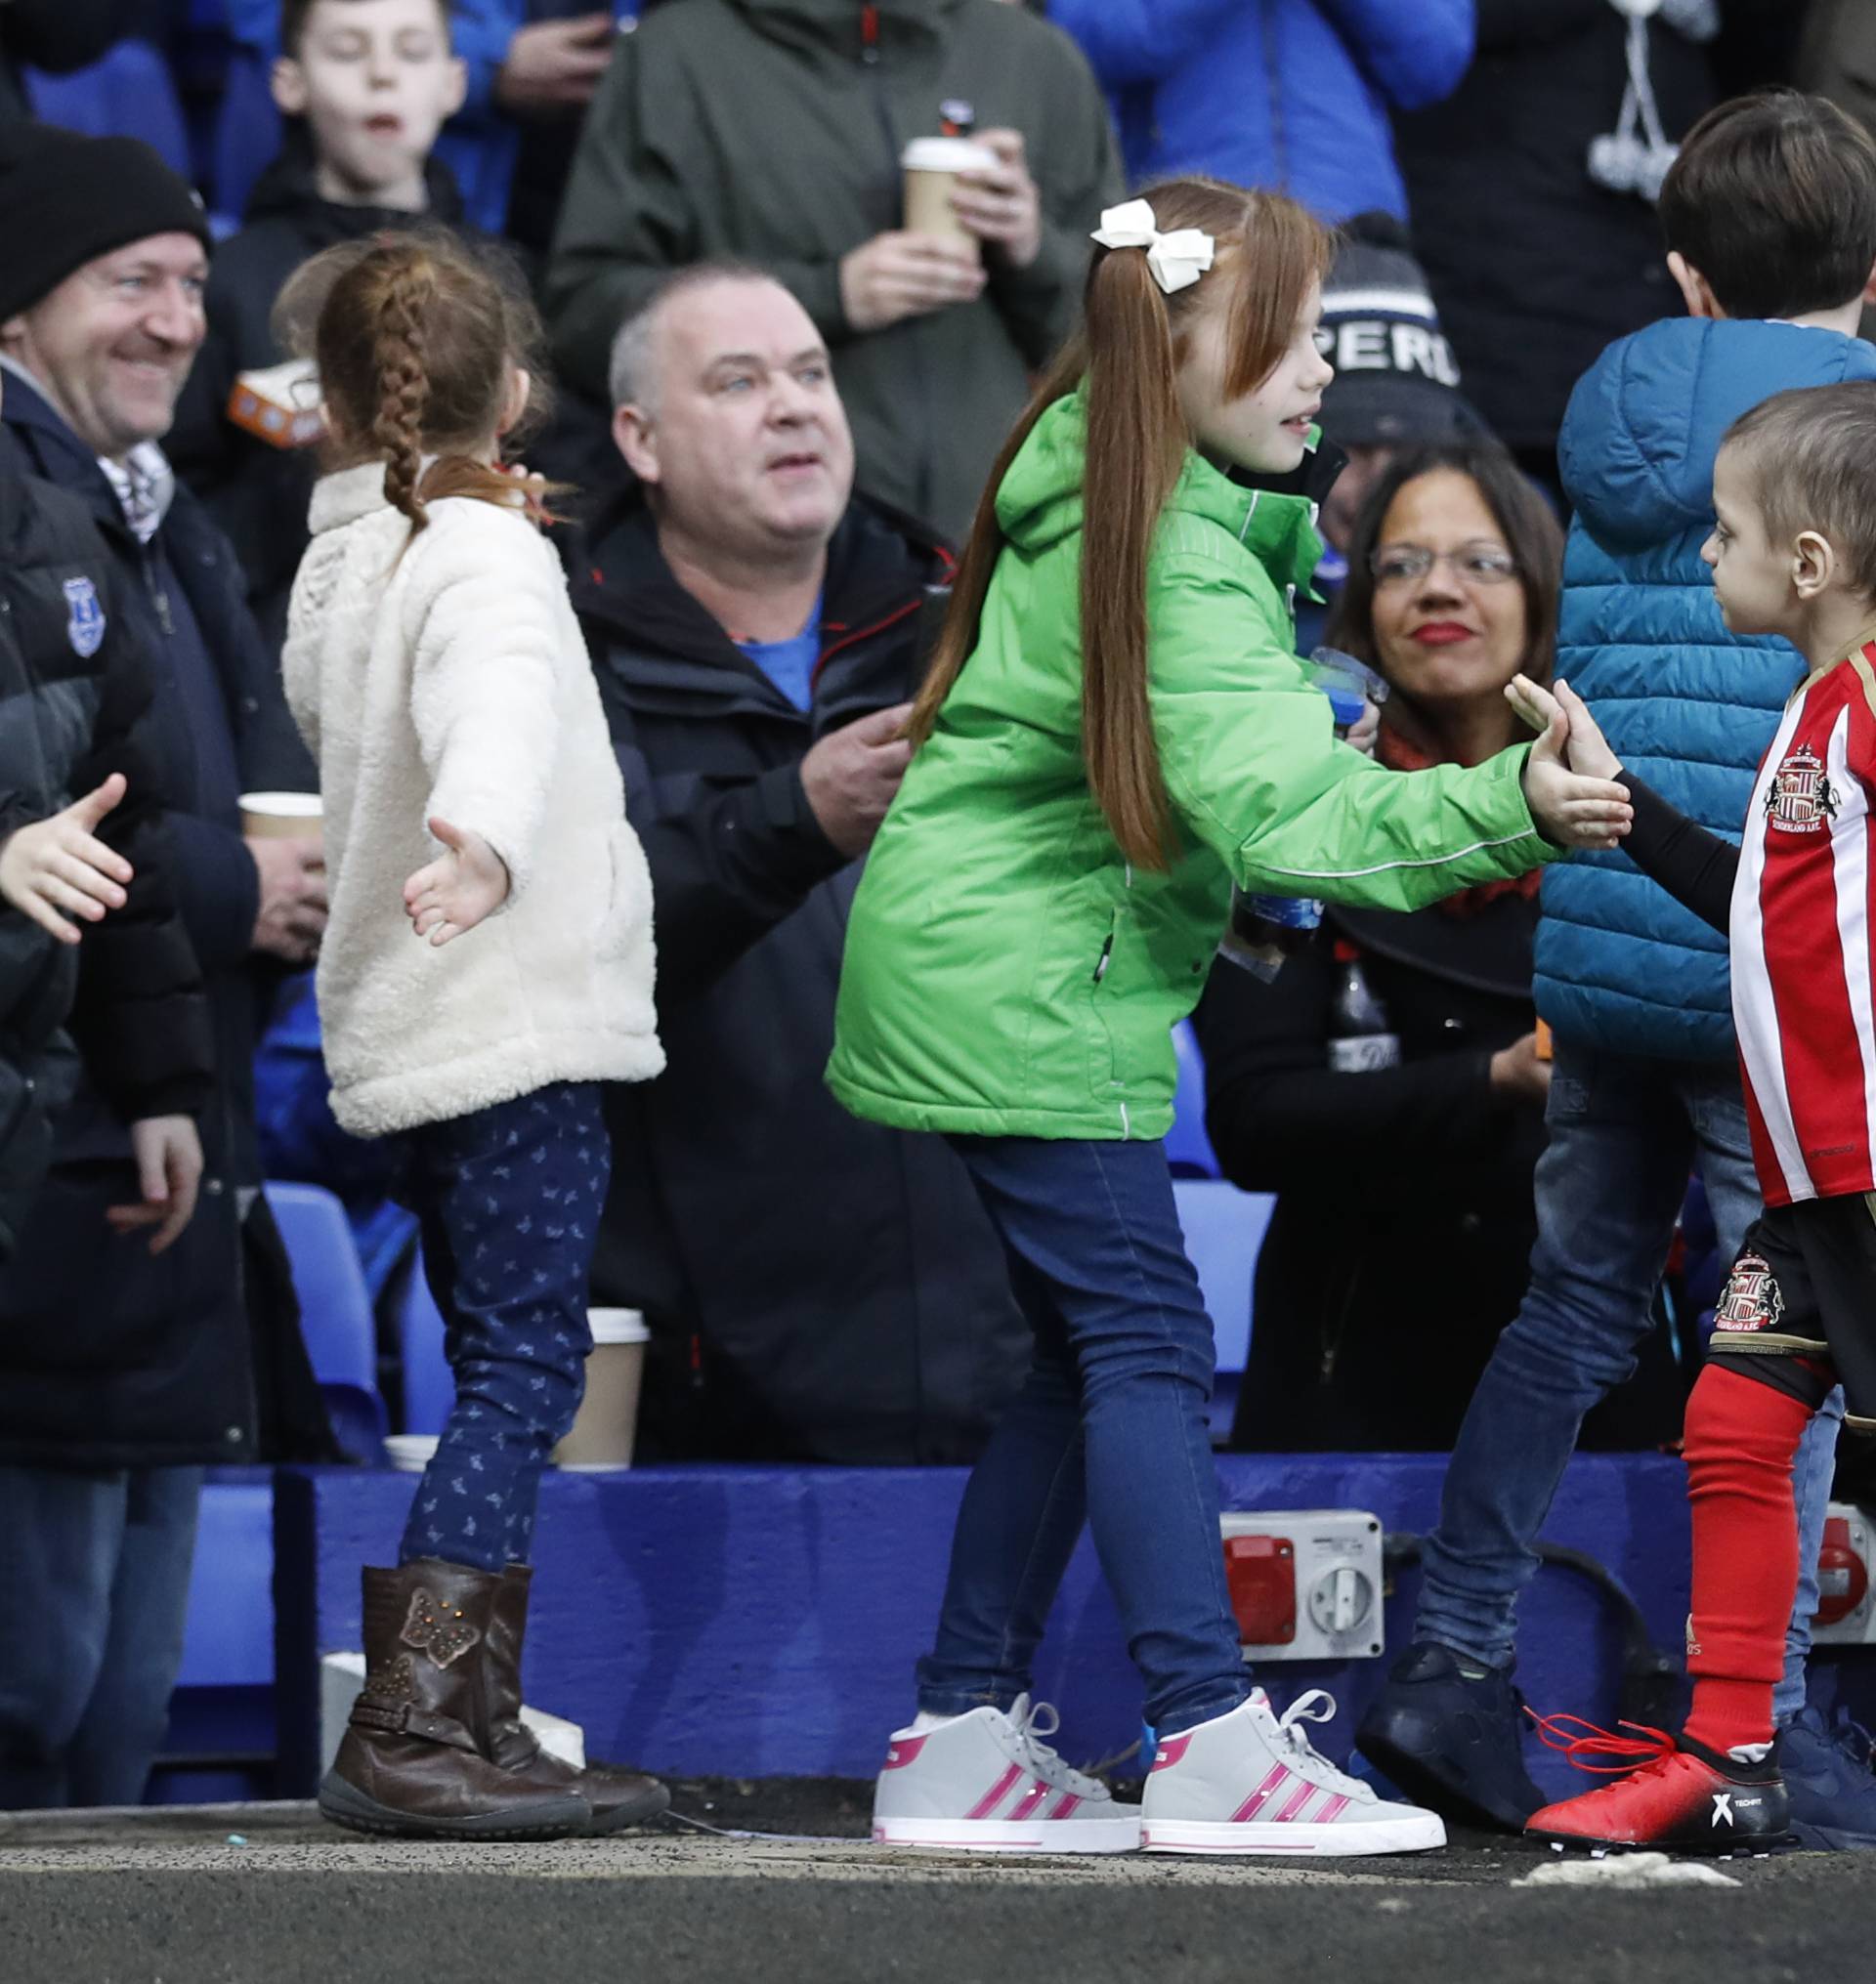 Young Sunderland fan Bradley Lowery shakes hands with a young Everton fan